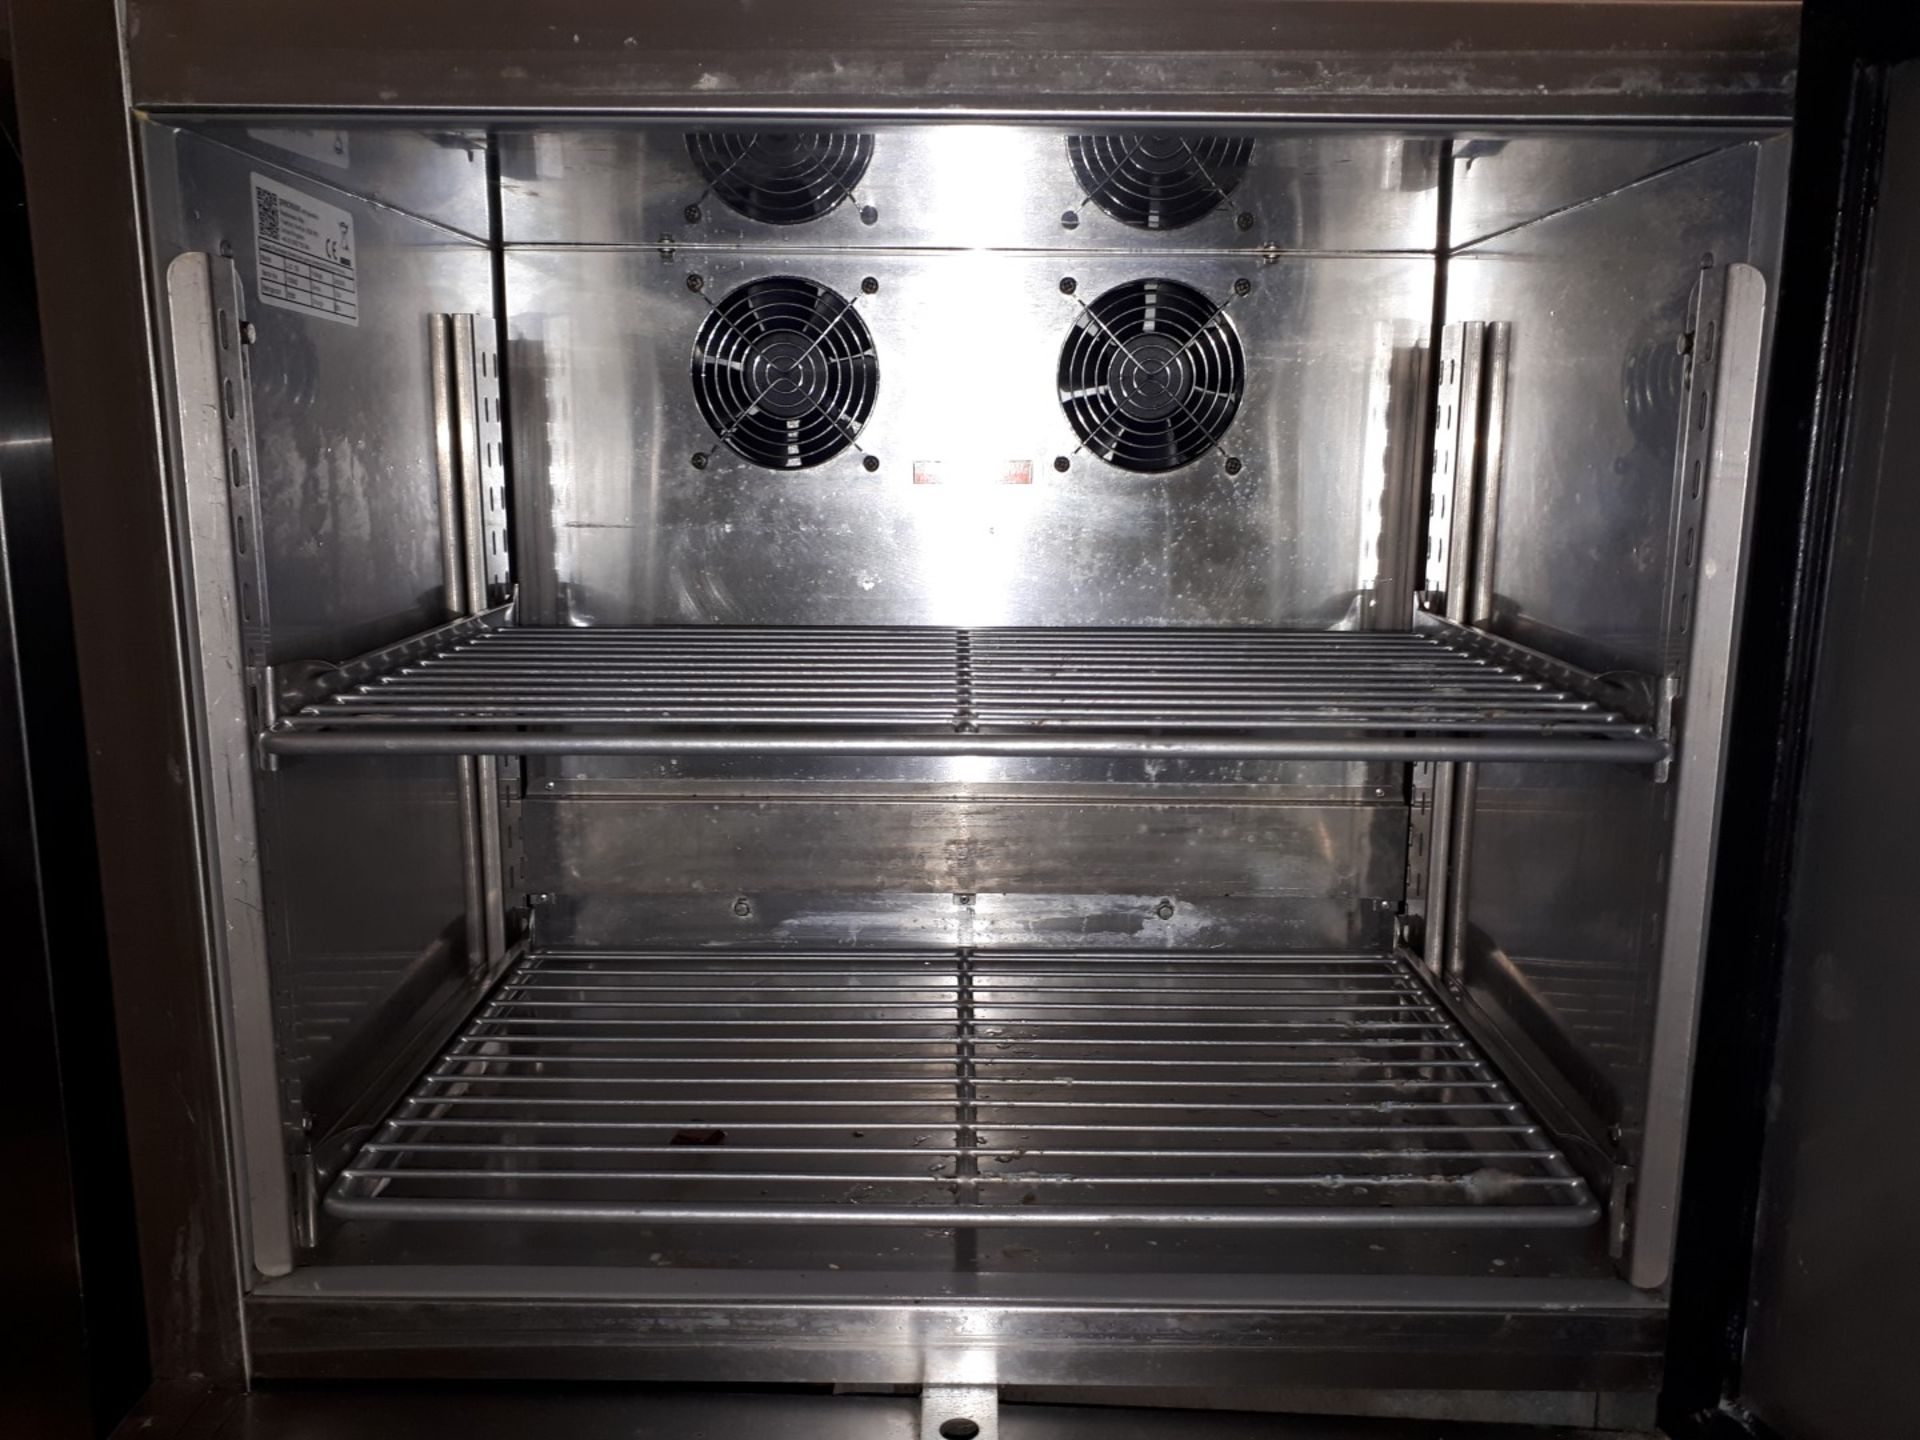 Precision LUC 150 Undercounter Stainless Steel Freezer - Image 3 of 4